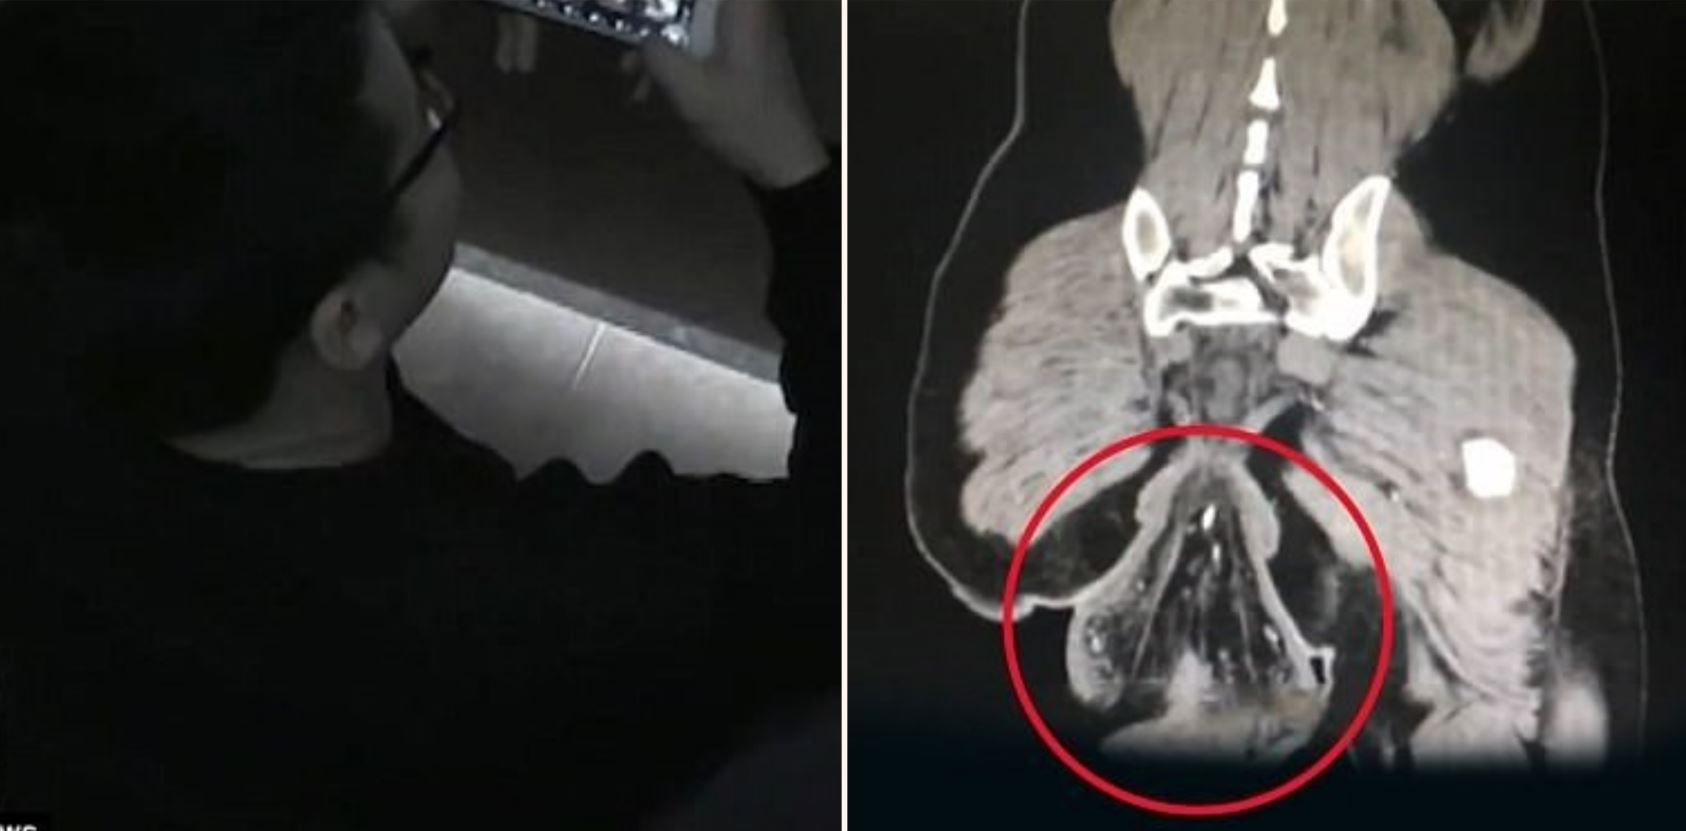 Man’s ass falls out after sitting on the toilet too long playing games on his phone